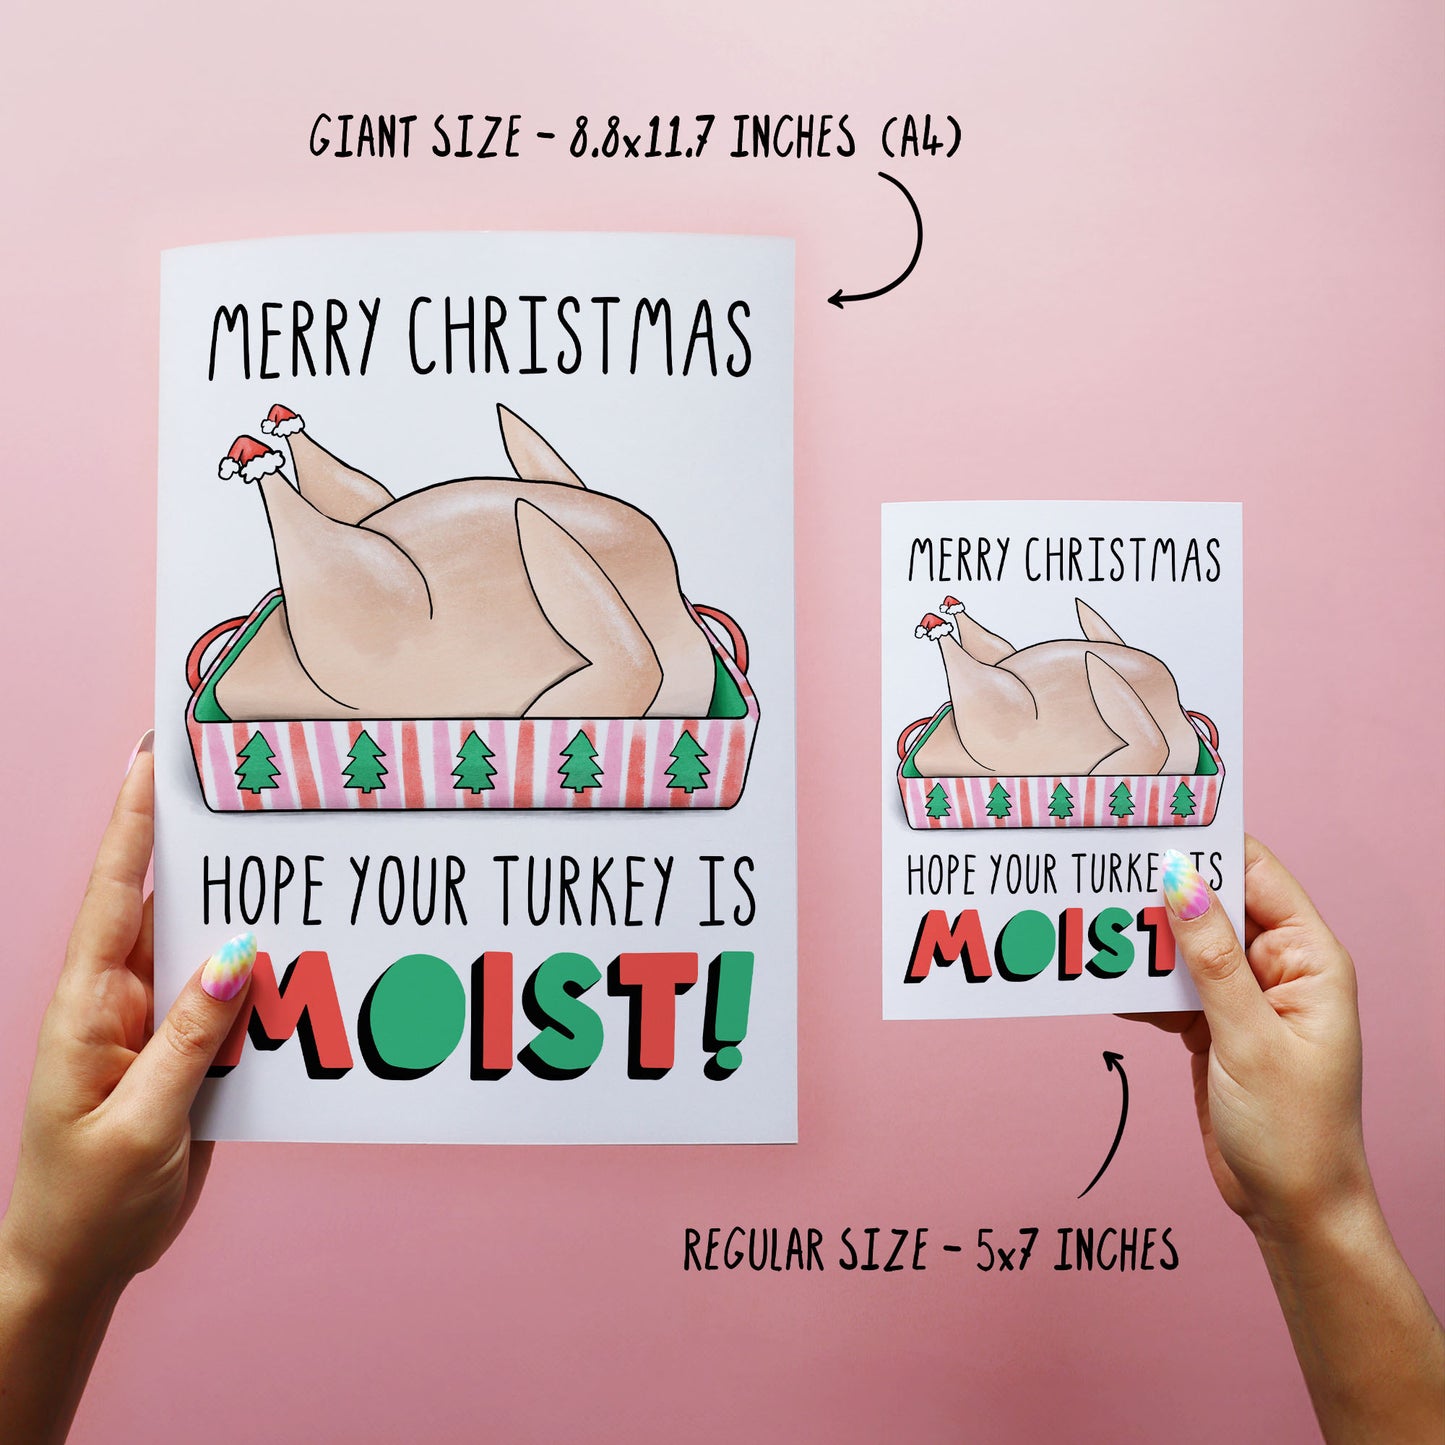 Moist - Funny Merry Christmas Wishes Card